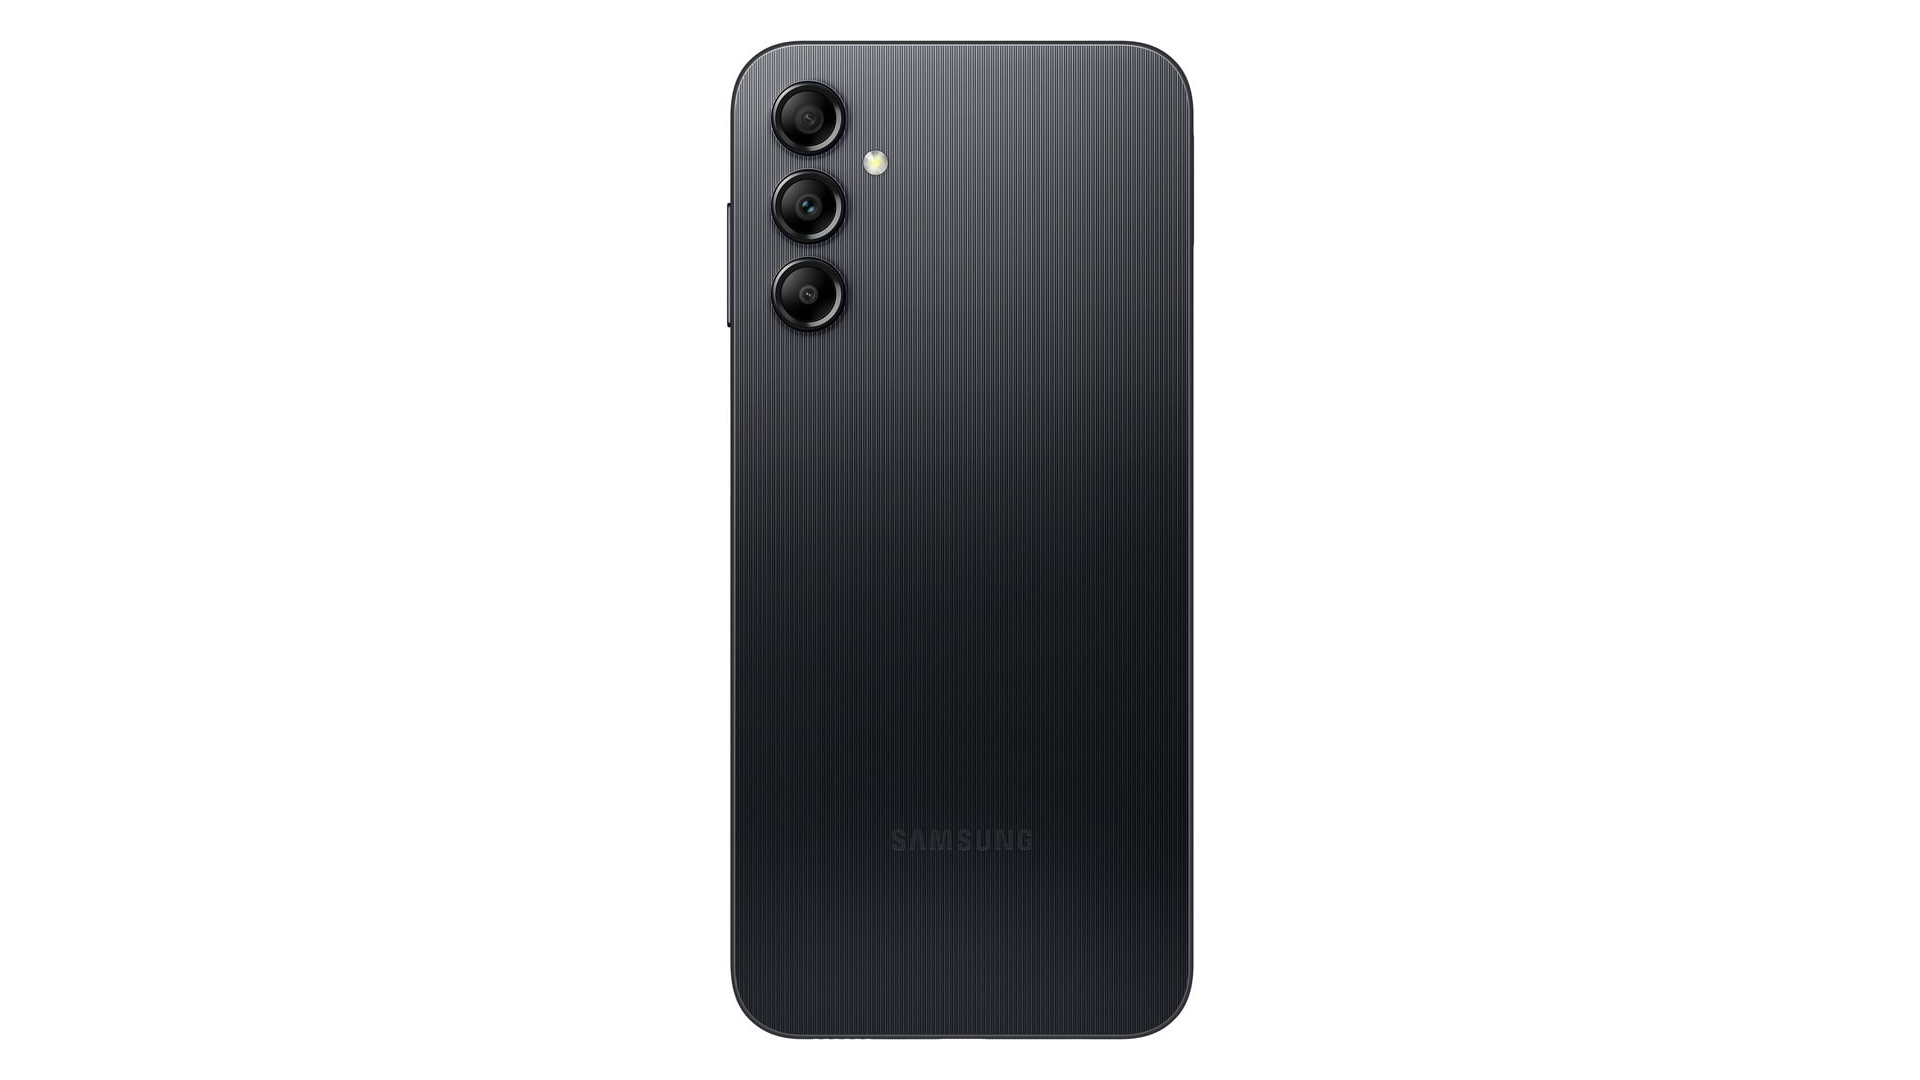 Samsung Galaxy A14 4G is coming soon with MediaTek chip, 60Hz screen - SamMobile